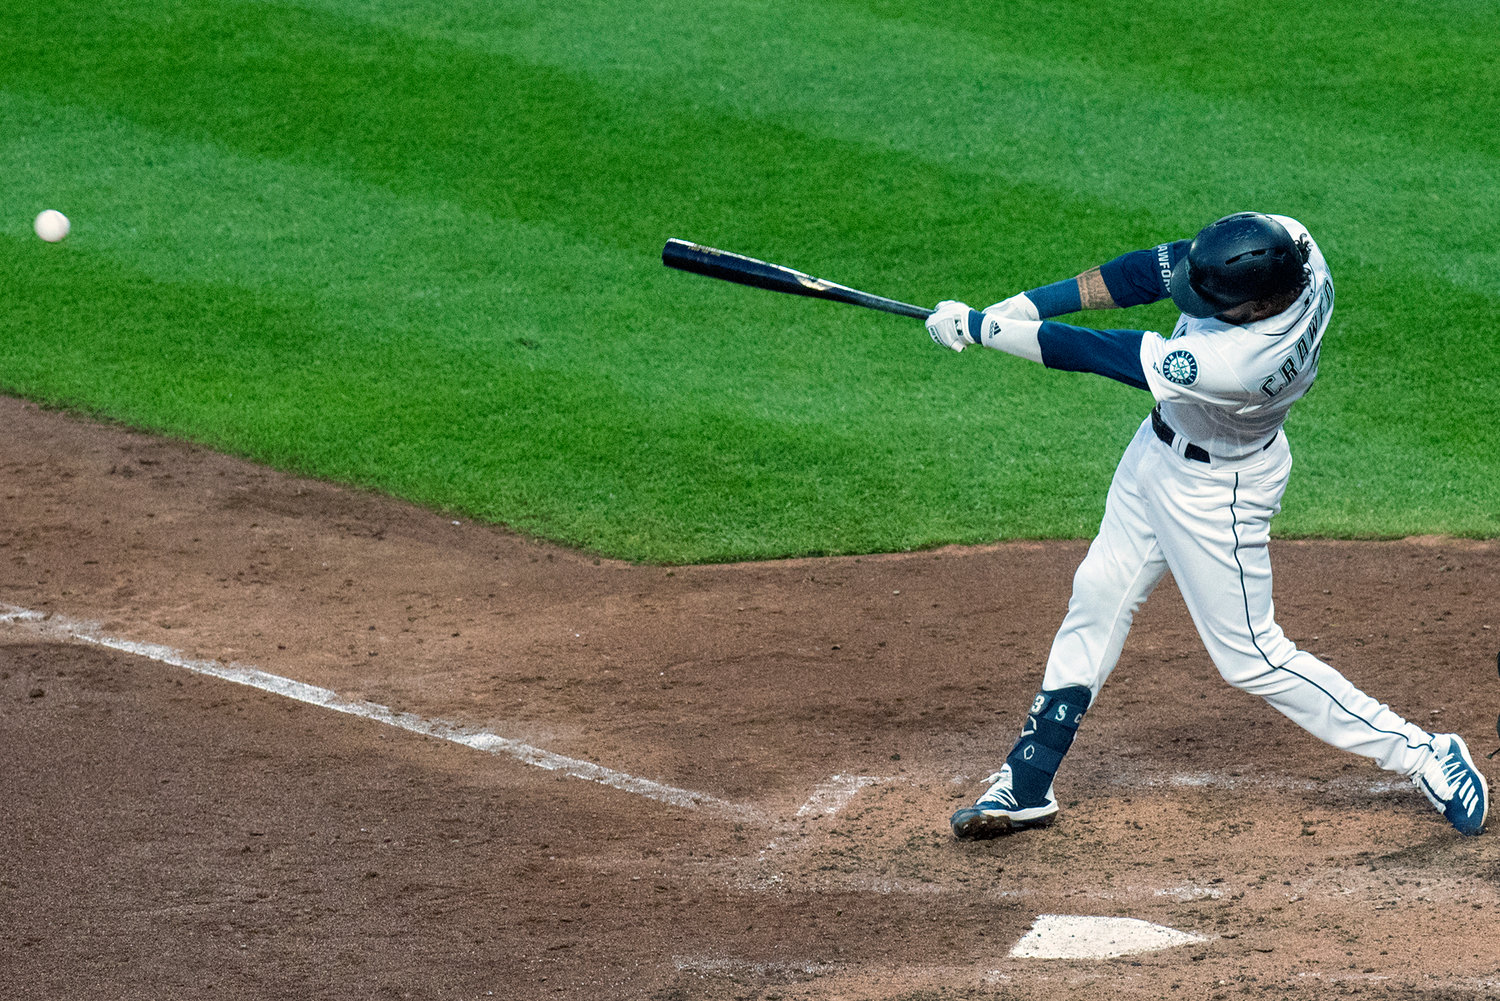 Seattle Mariners shortstop J.P. Crawford rips a double down the right field line against the Texas Rangers during a Major League Baseball game on Tuesday, July 23, 2019, at T-Mobile Park in Seattle.